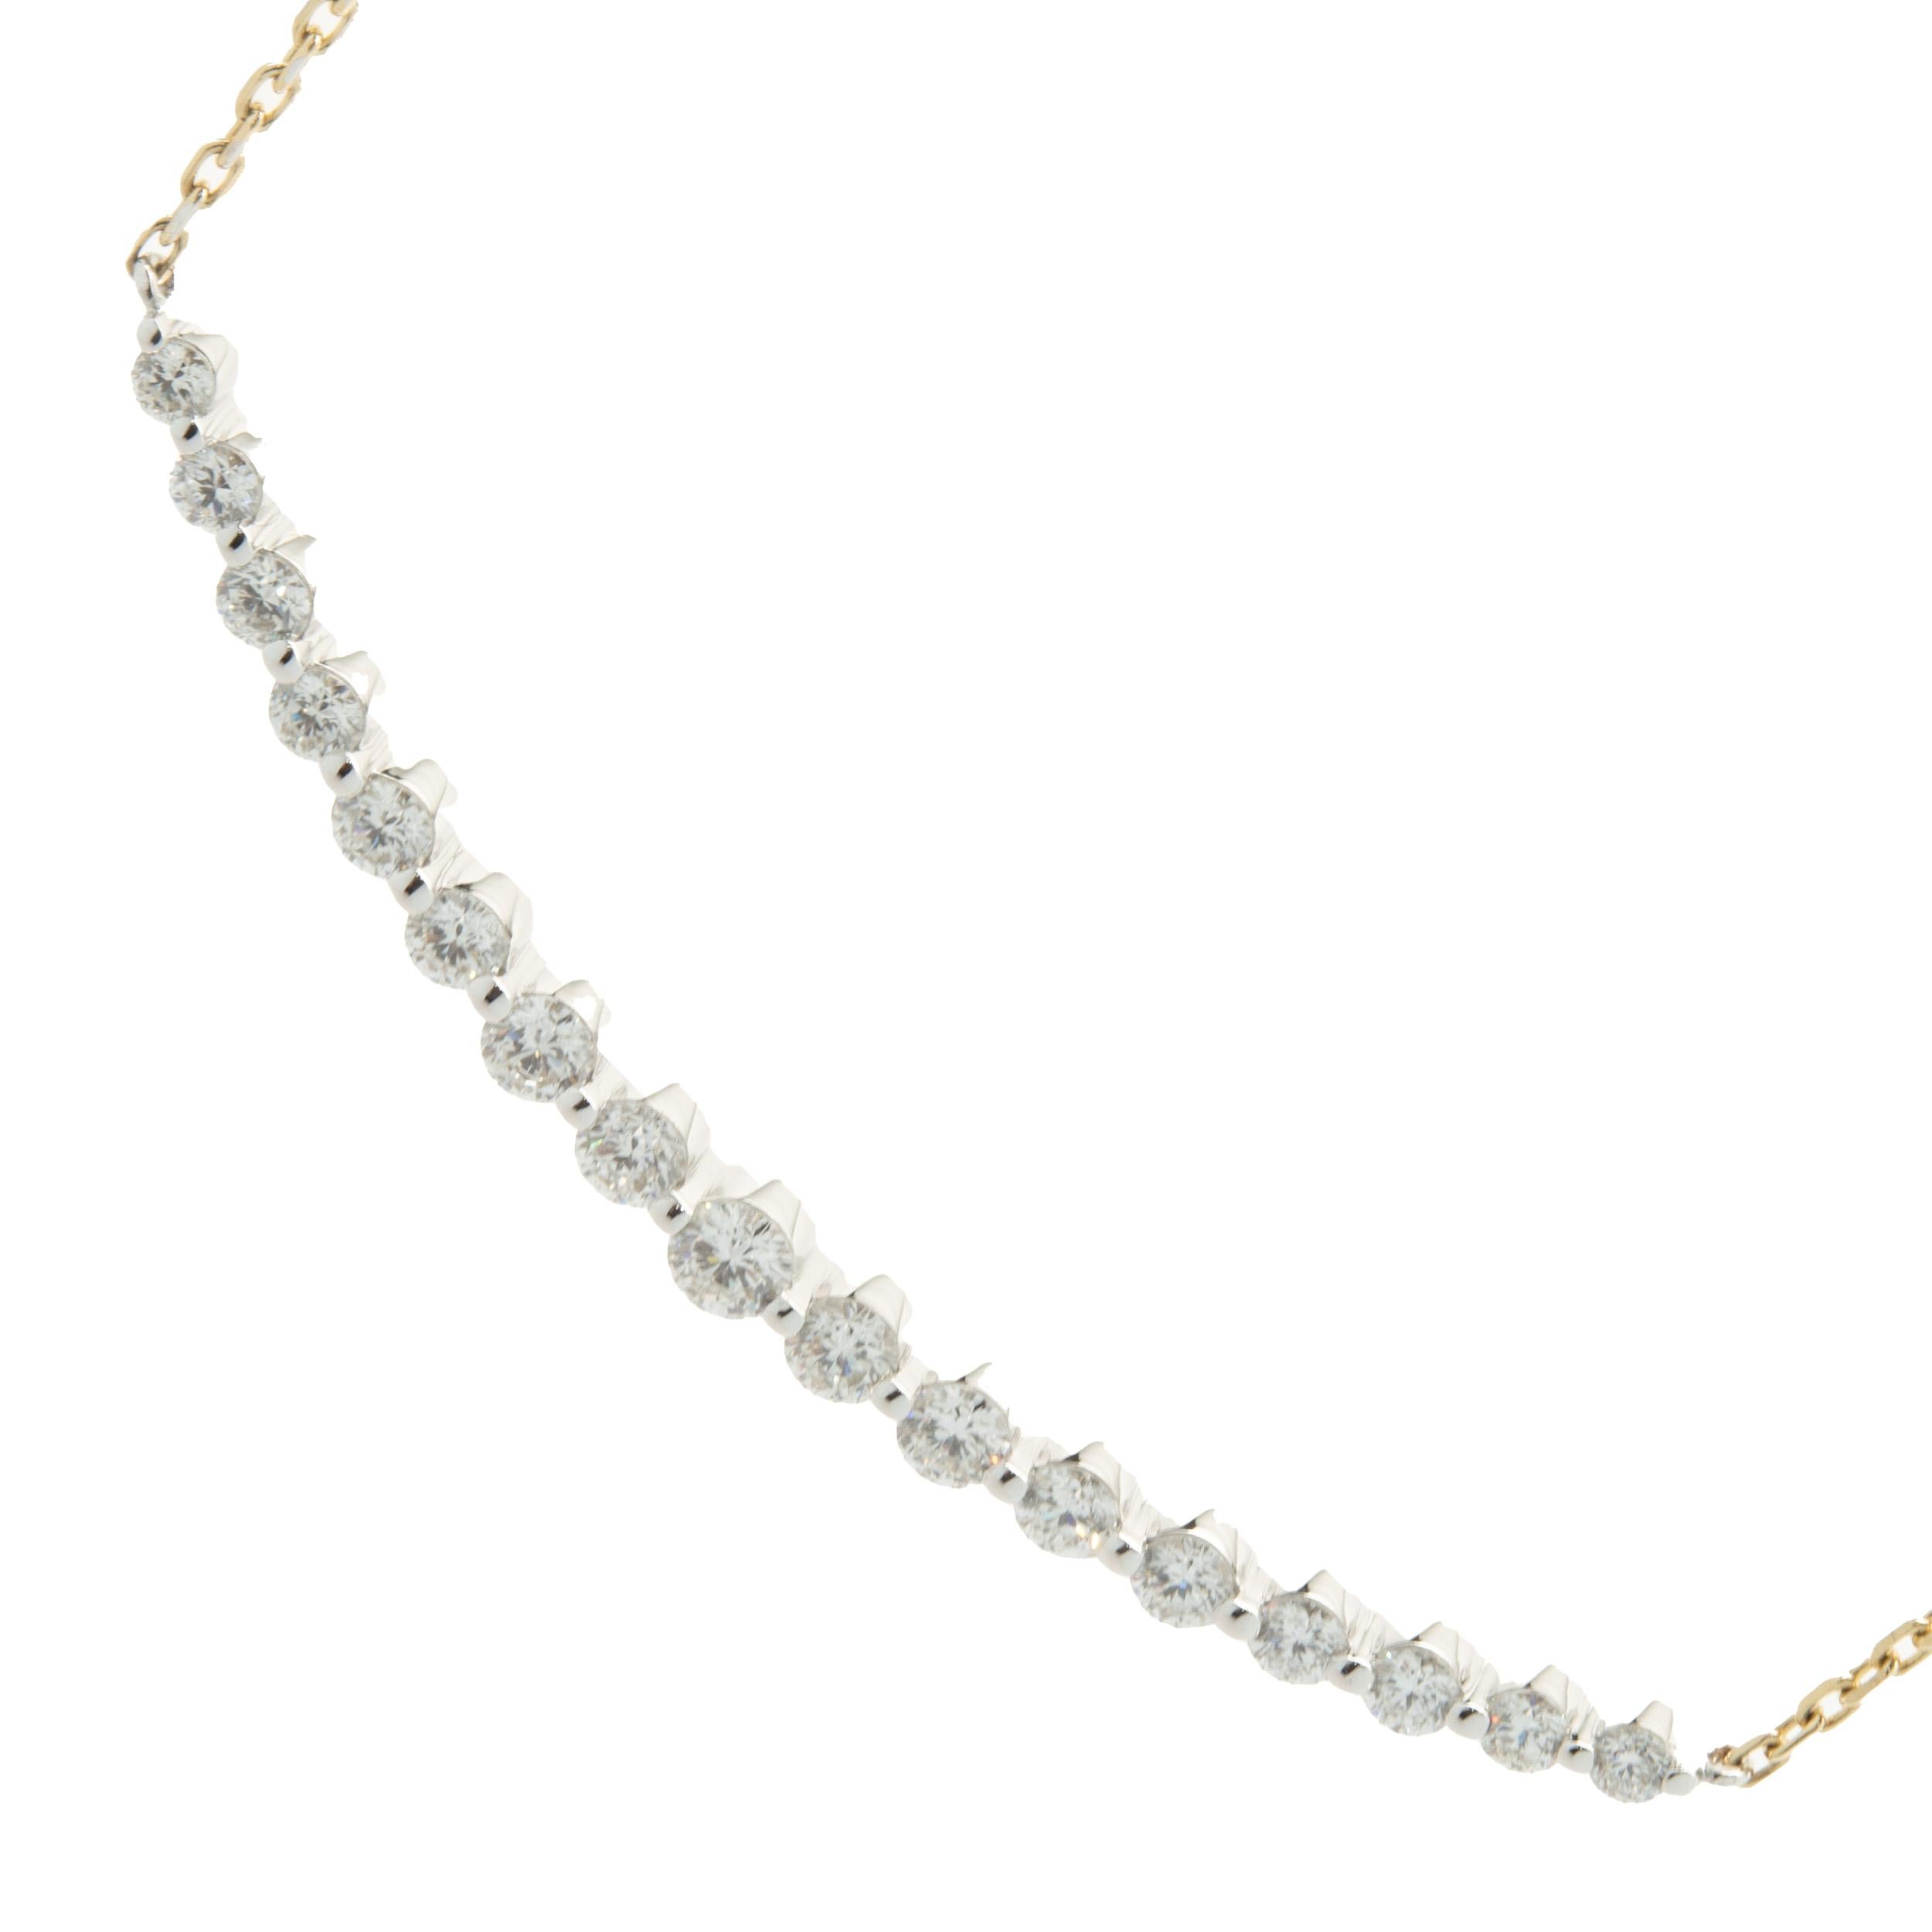 Designer: custom design
Material: 14K yellow & white gold
Diamond: 17 round brilliant cut = 1.43cttw
Color: G
Clarity: VS2
Dimensions: necklace measures 18-inches in length 
Weight: 4.62 grams